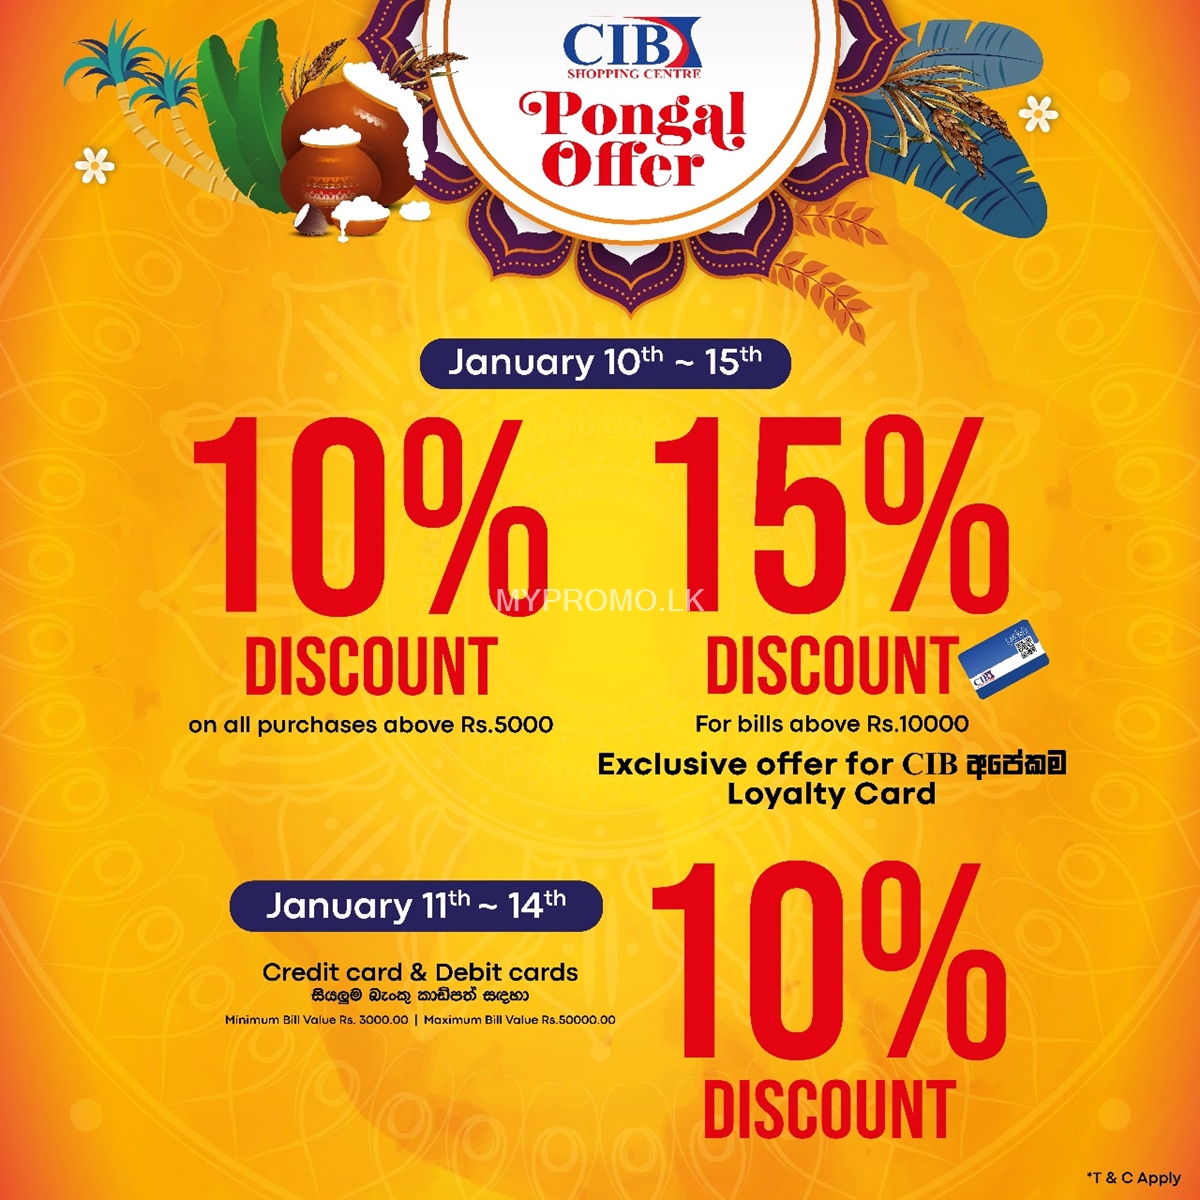 Get up to 15% Discount at CIB Shopping Centre